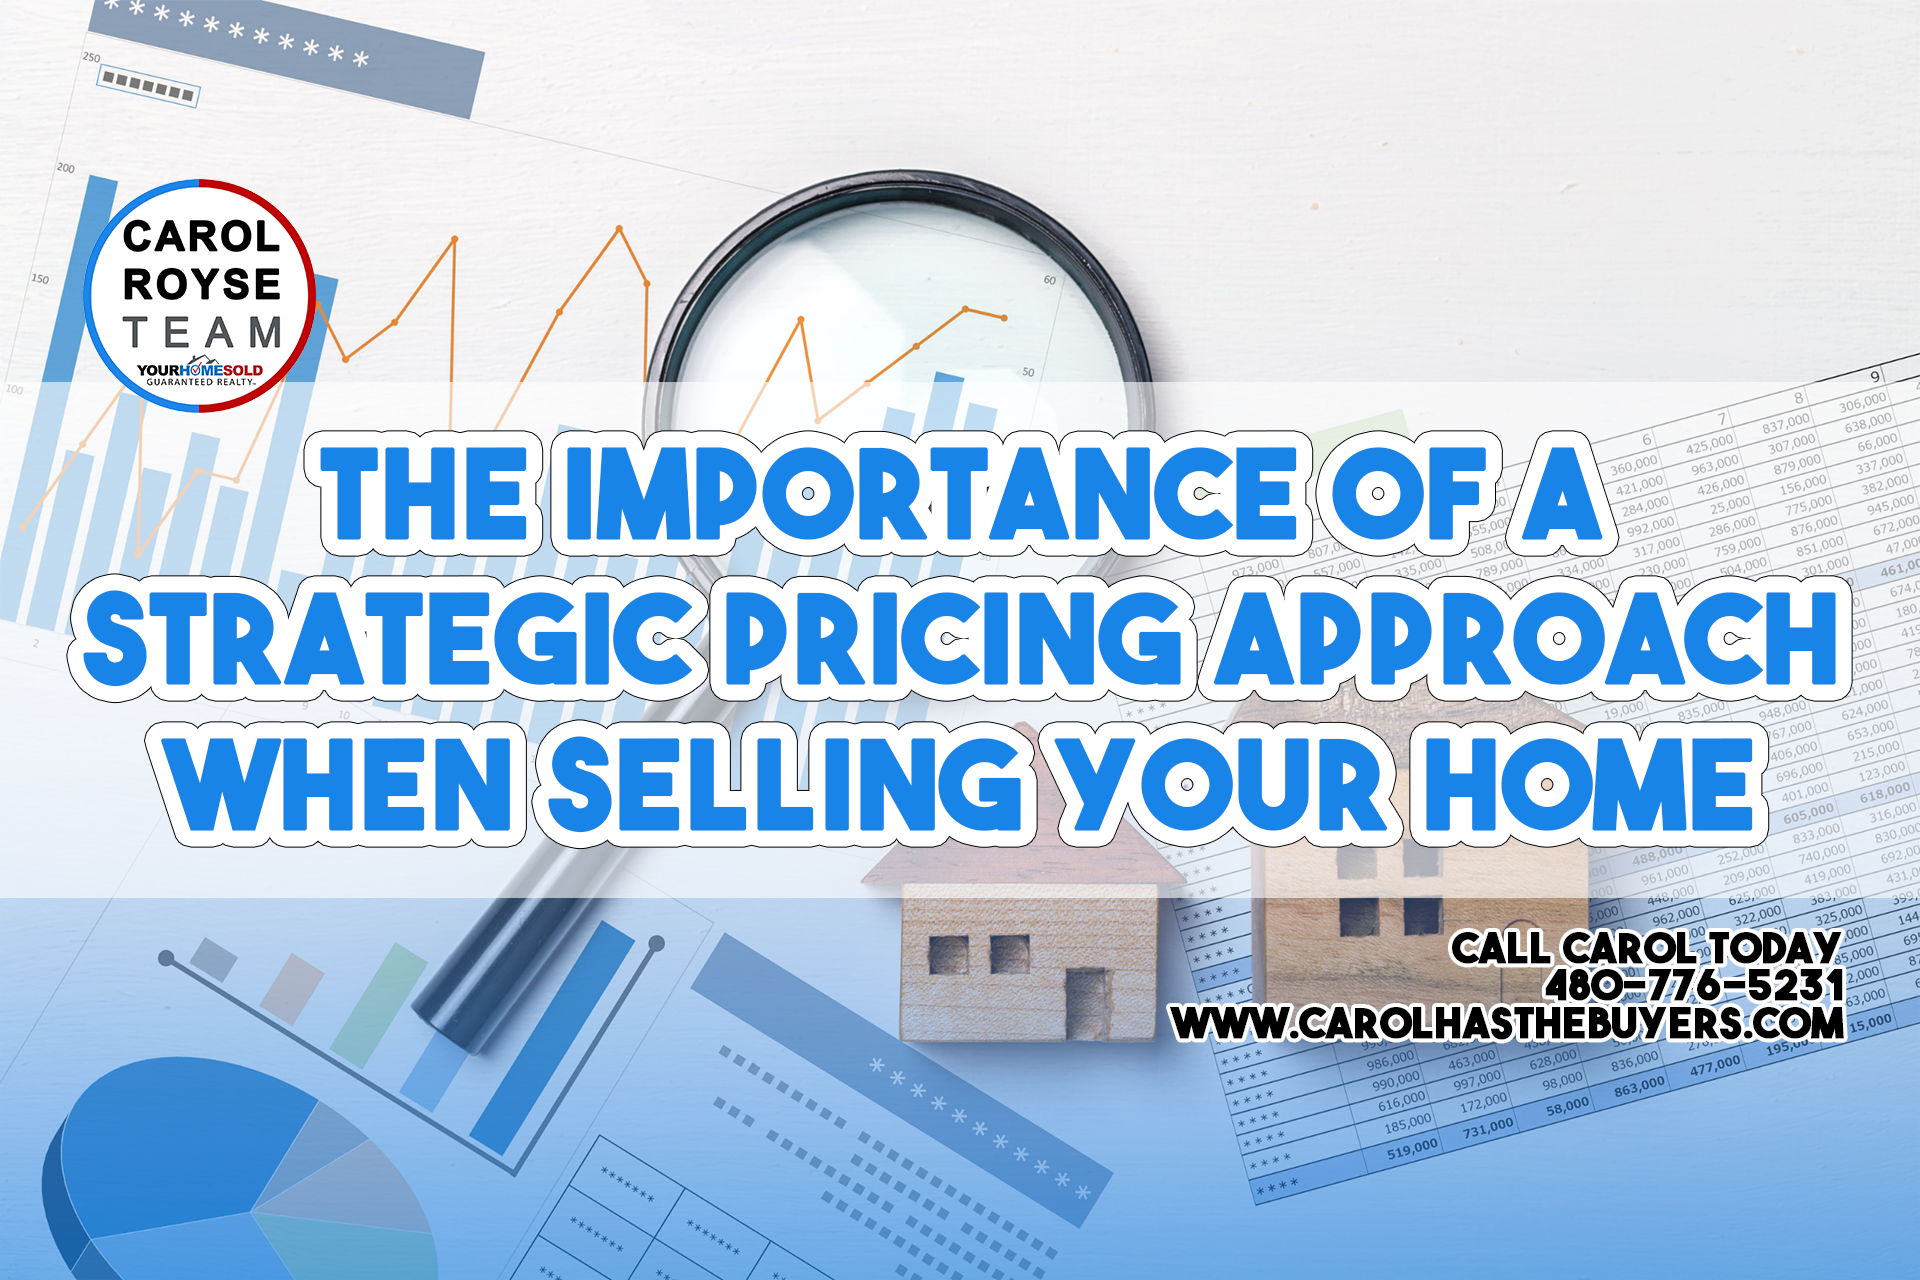 The Importance of a Strategic Pricing Approach When Selling Your Home